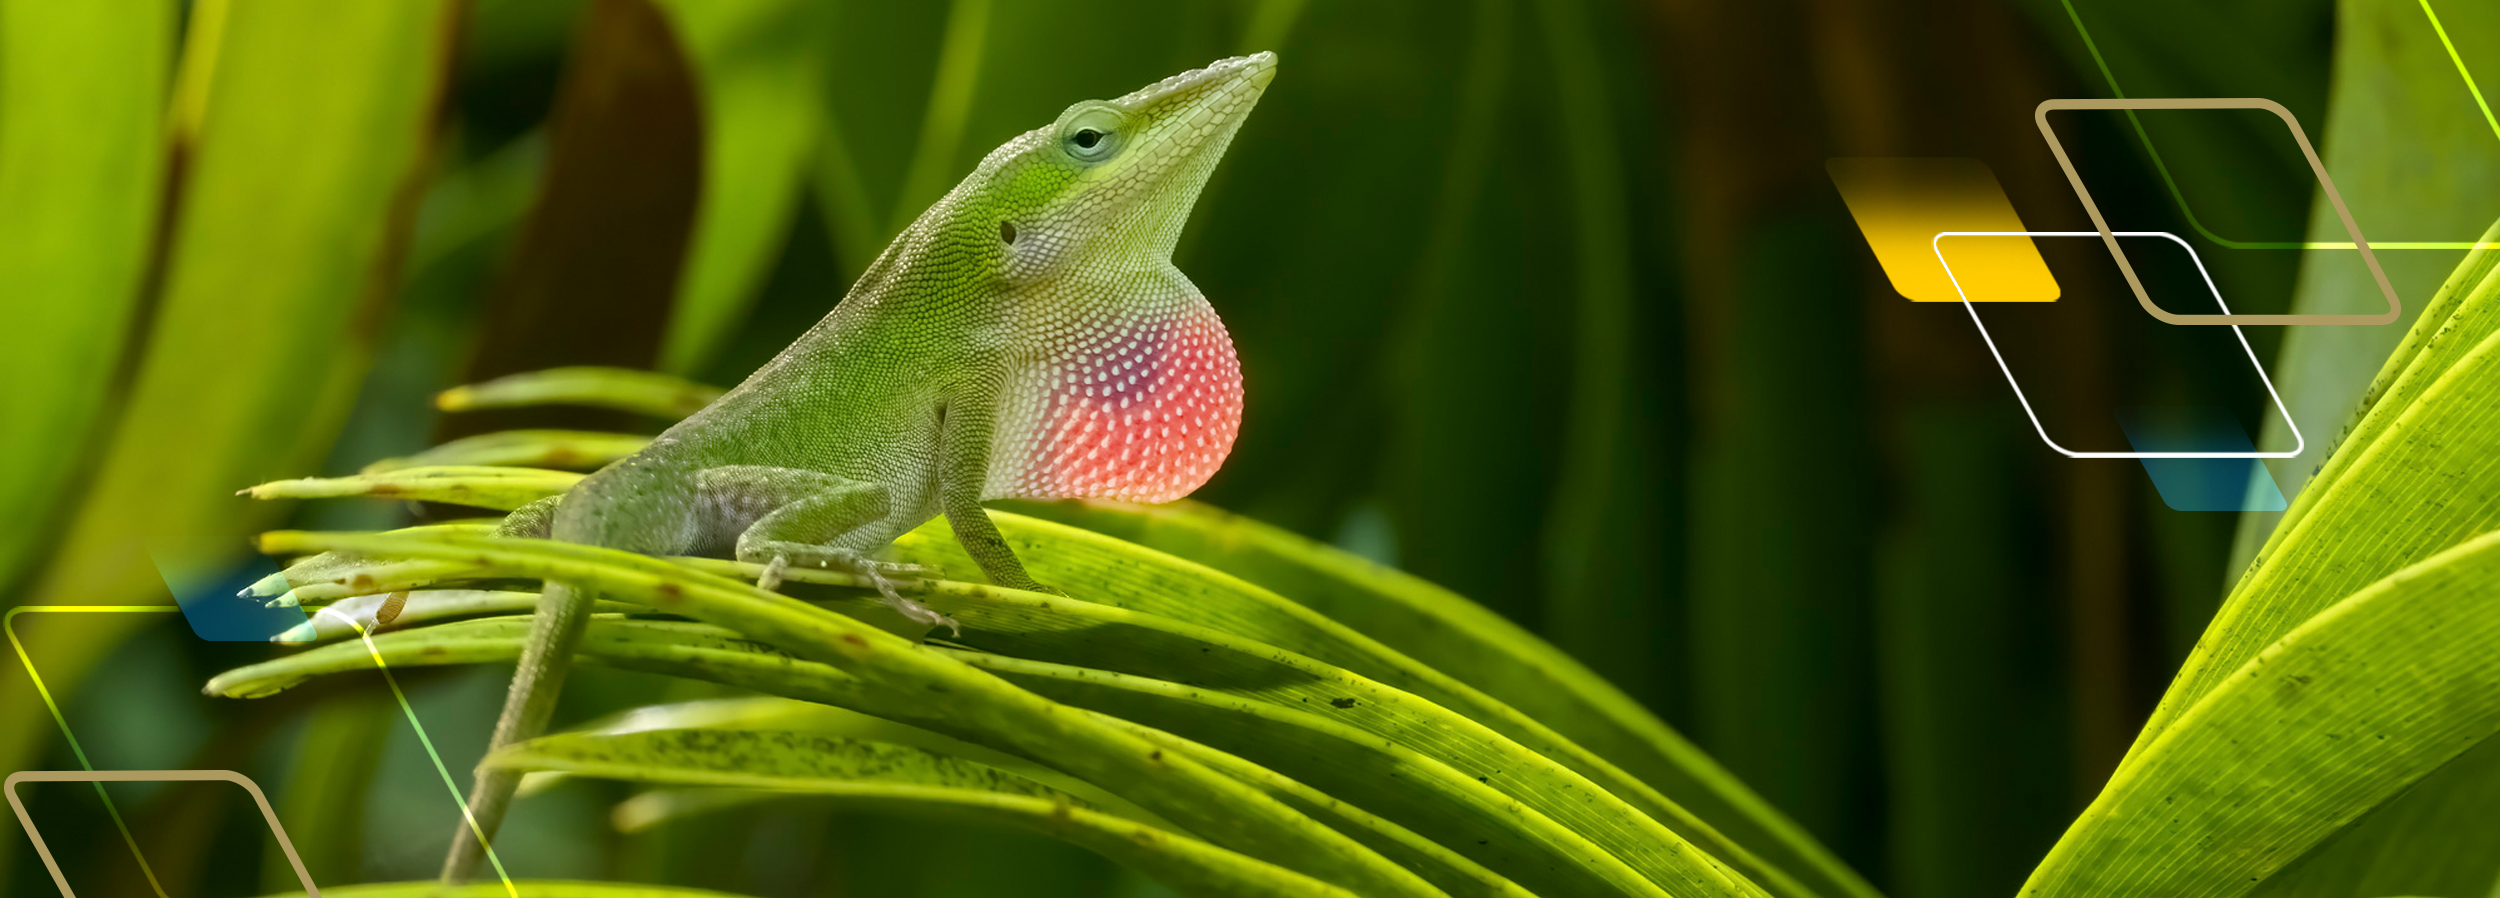 A lizard exploring the area around it while standing on a leaf.